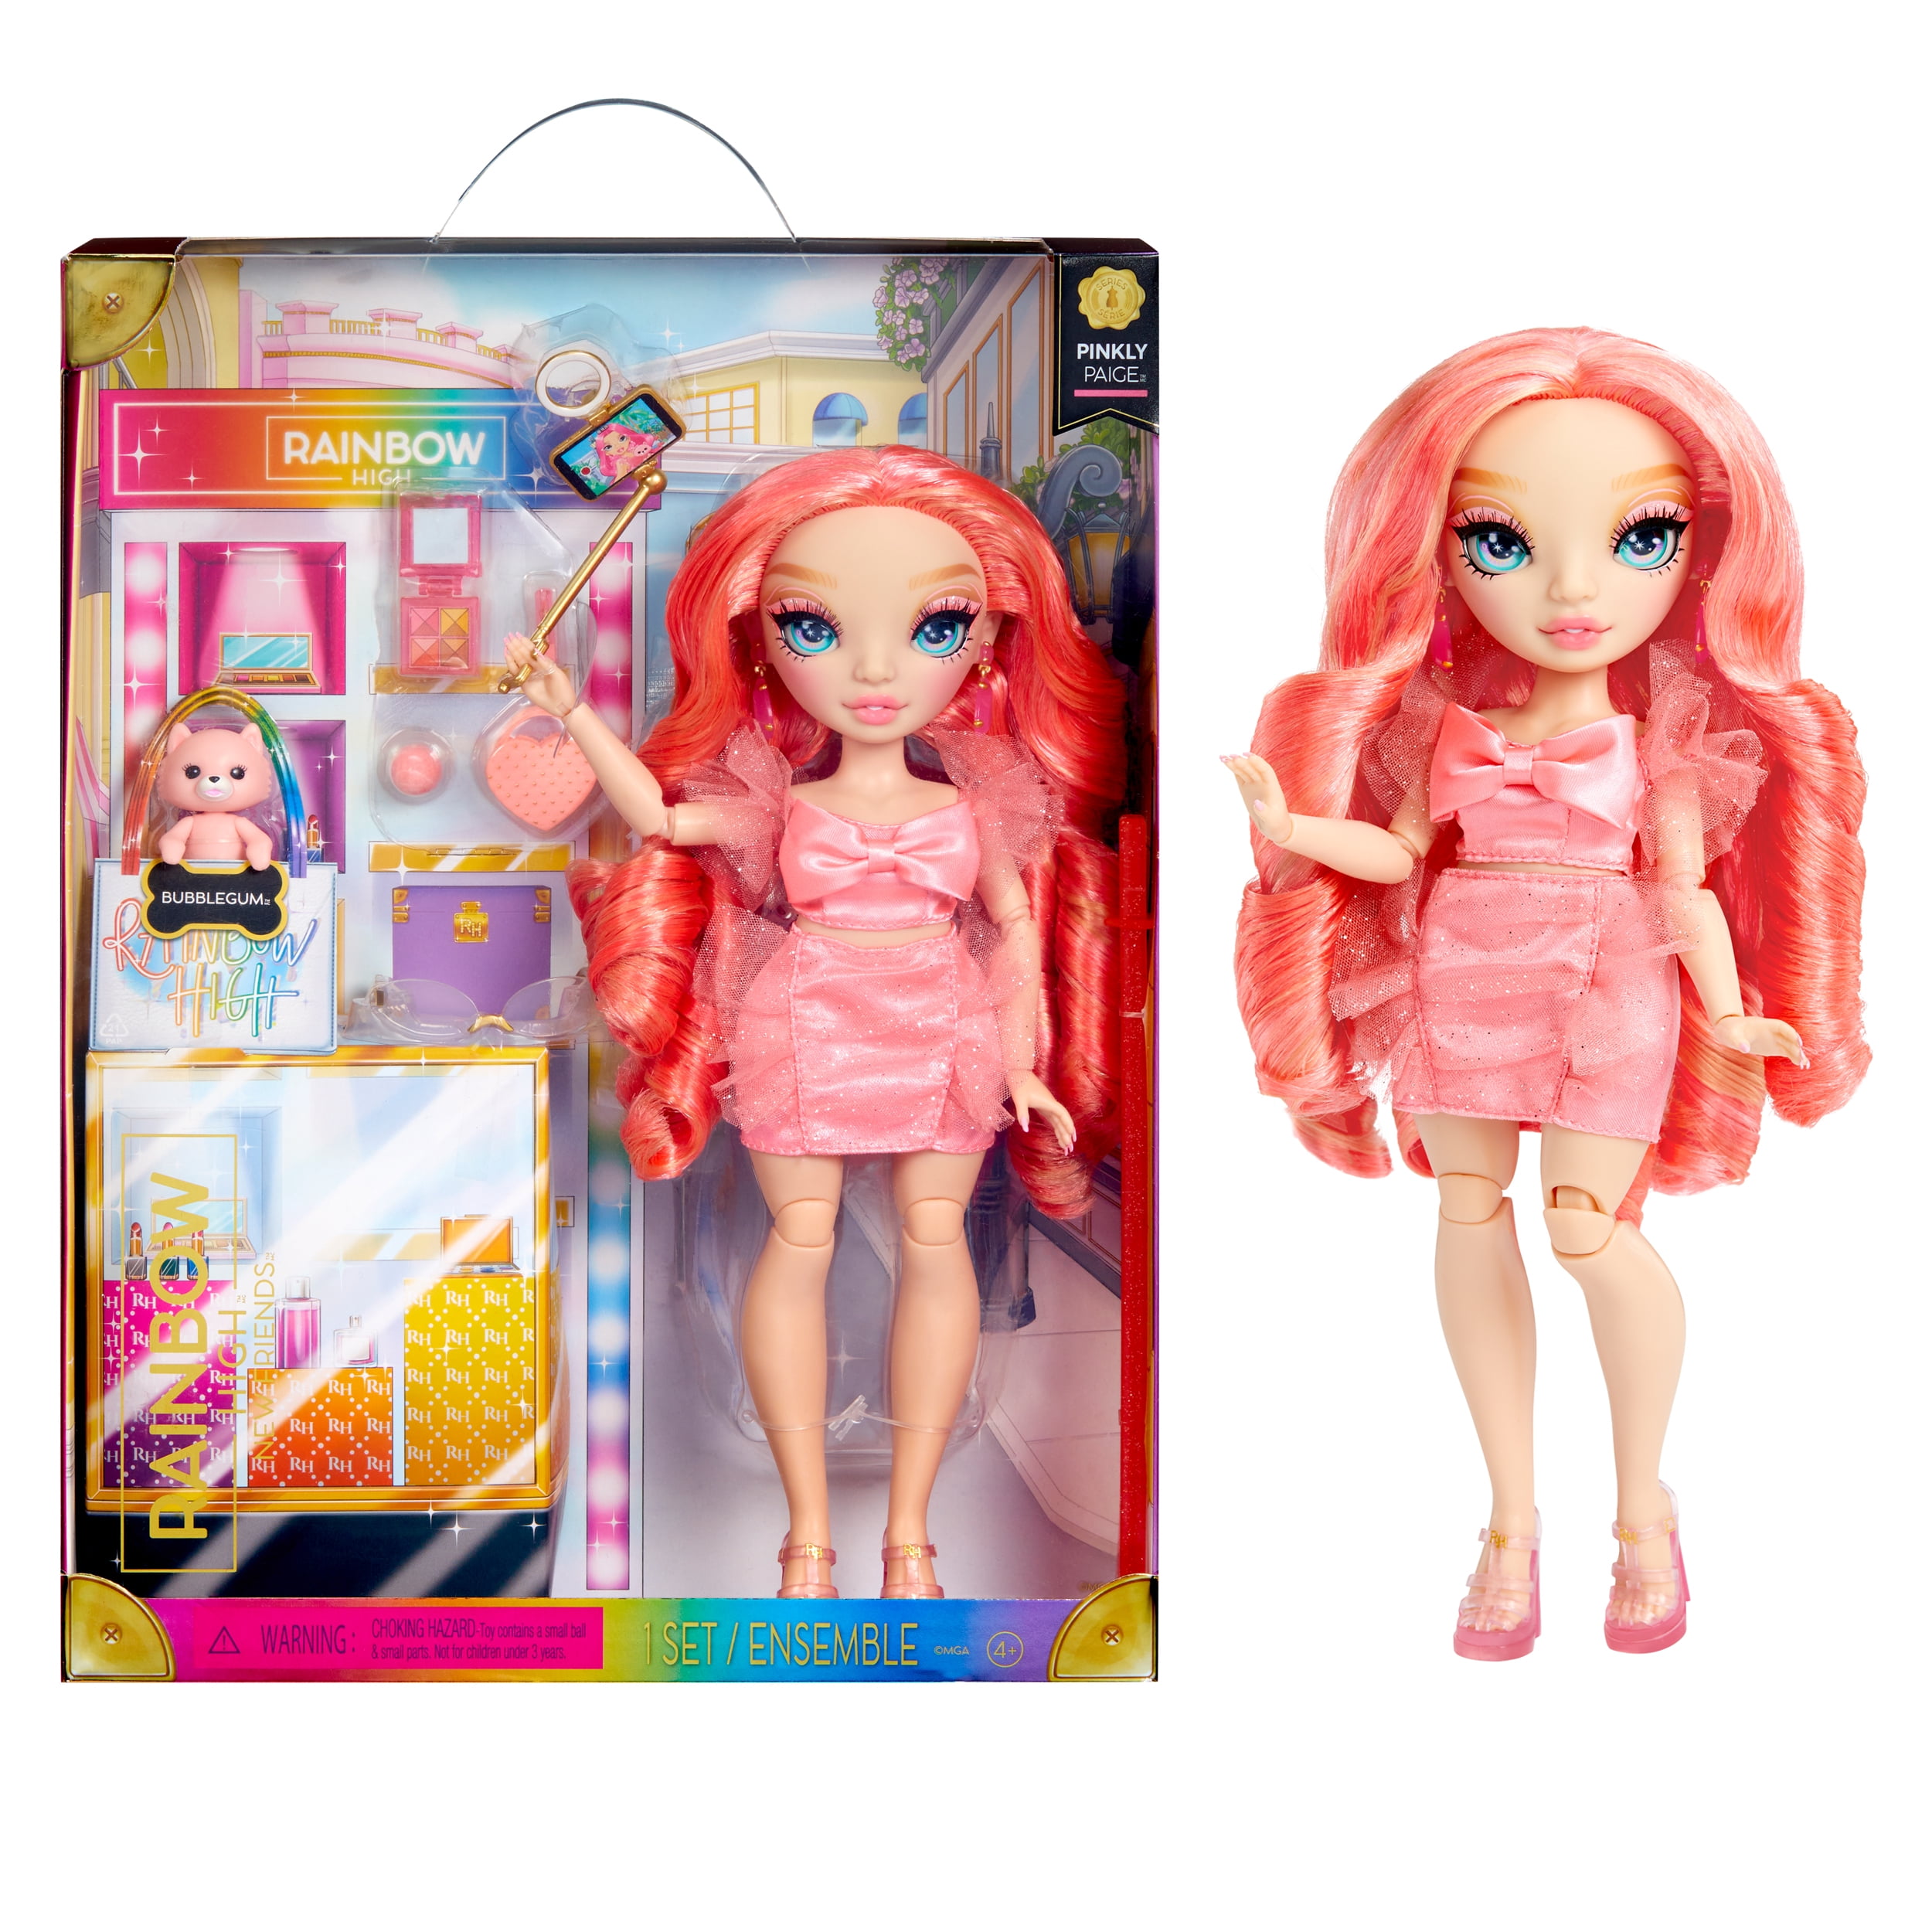 Rainbow High Pinkly - Pink Fashion Doll in Fashionable Outfit, with Glasses  & 10+ Colorful Play Accessories. Gift for Kids 4-12 Years and Collectors